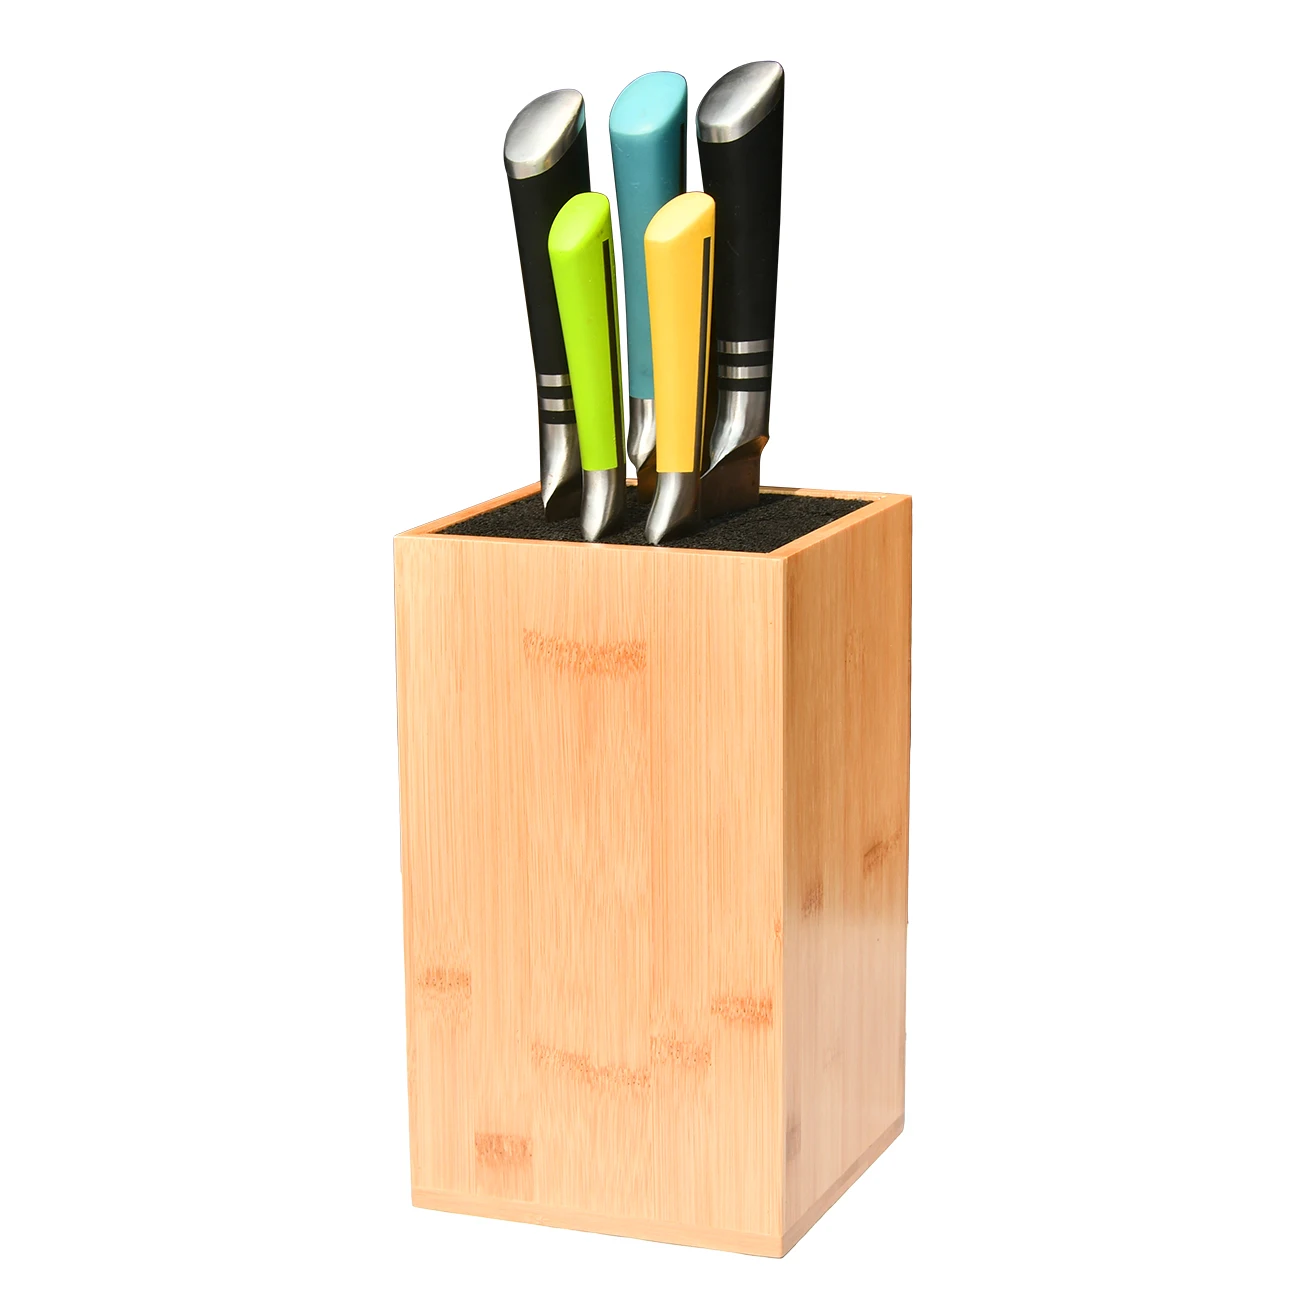 Novelty universal bamboo knife block sets with bristles in kitchen knives & accessories,knife storage bristles